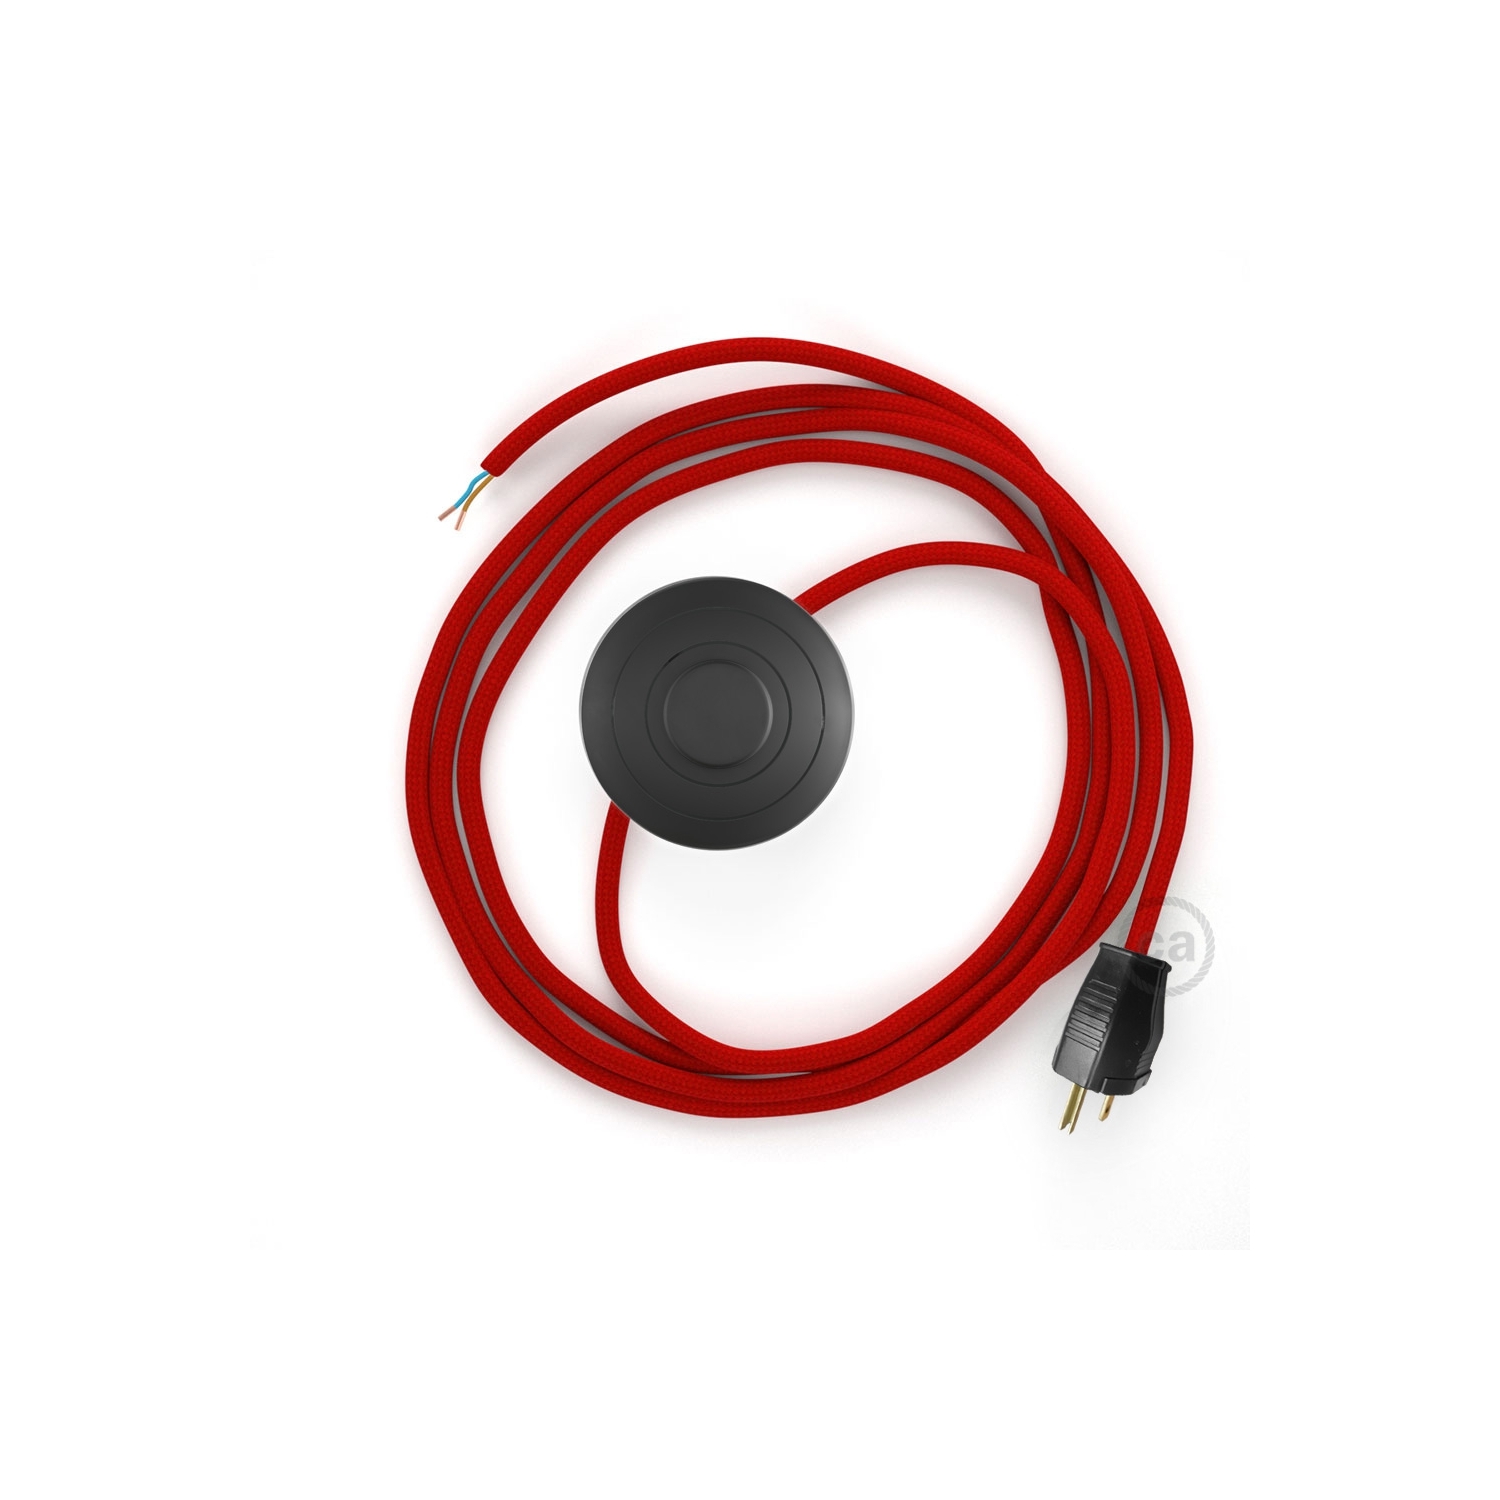 Power Cord with foot switch, RM09 Red Rayon - Choose color of switch/plug